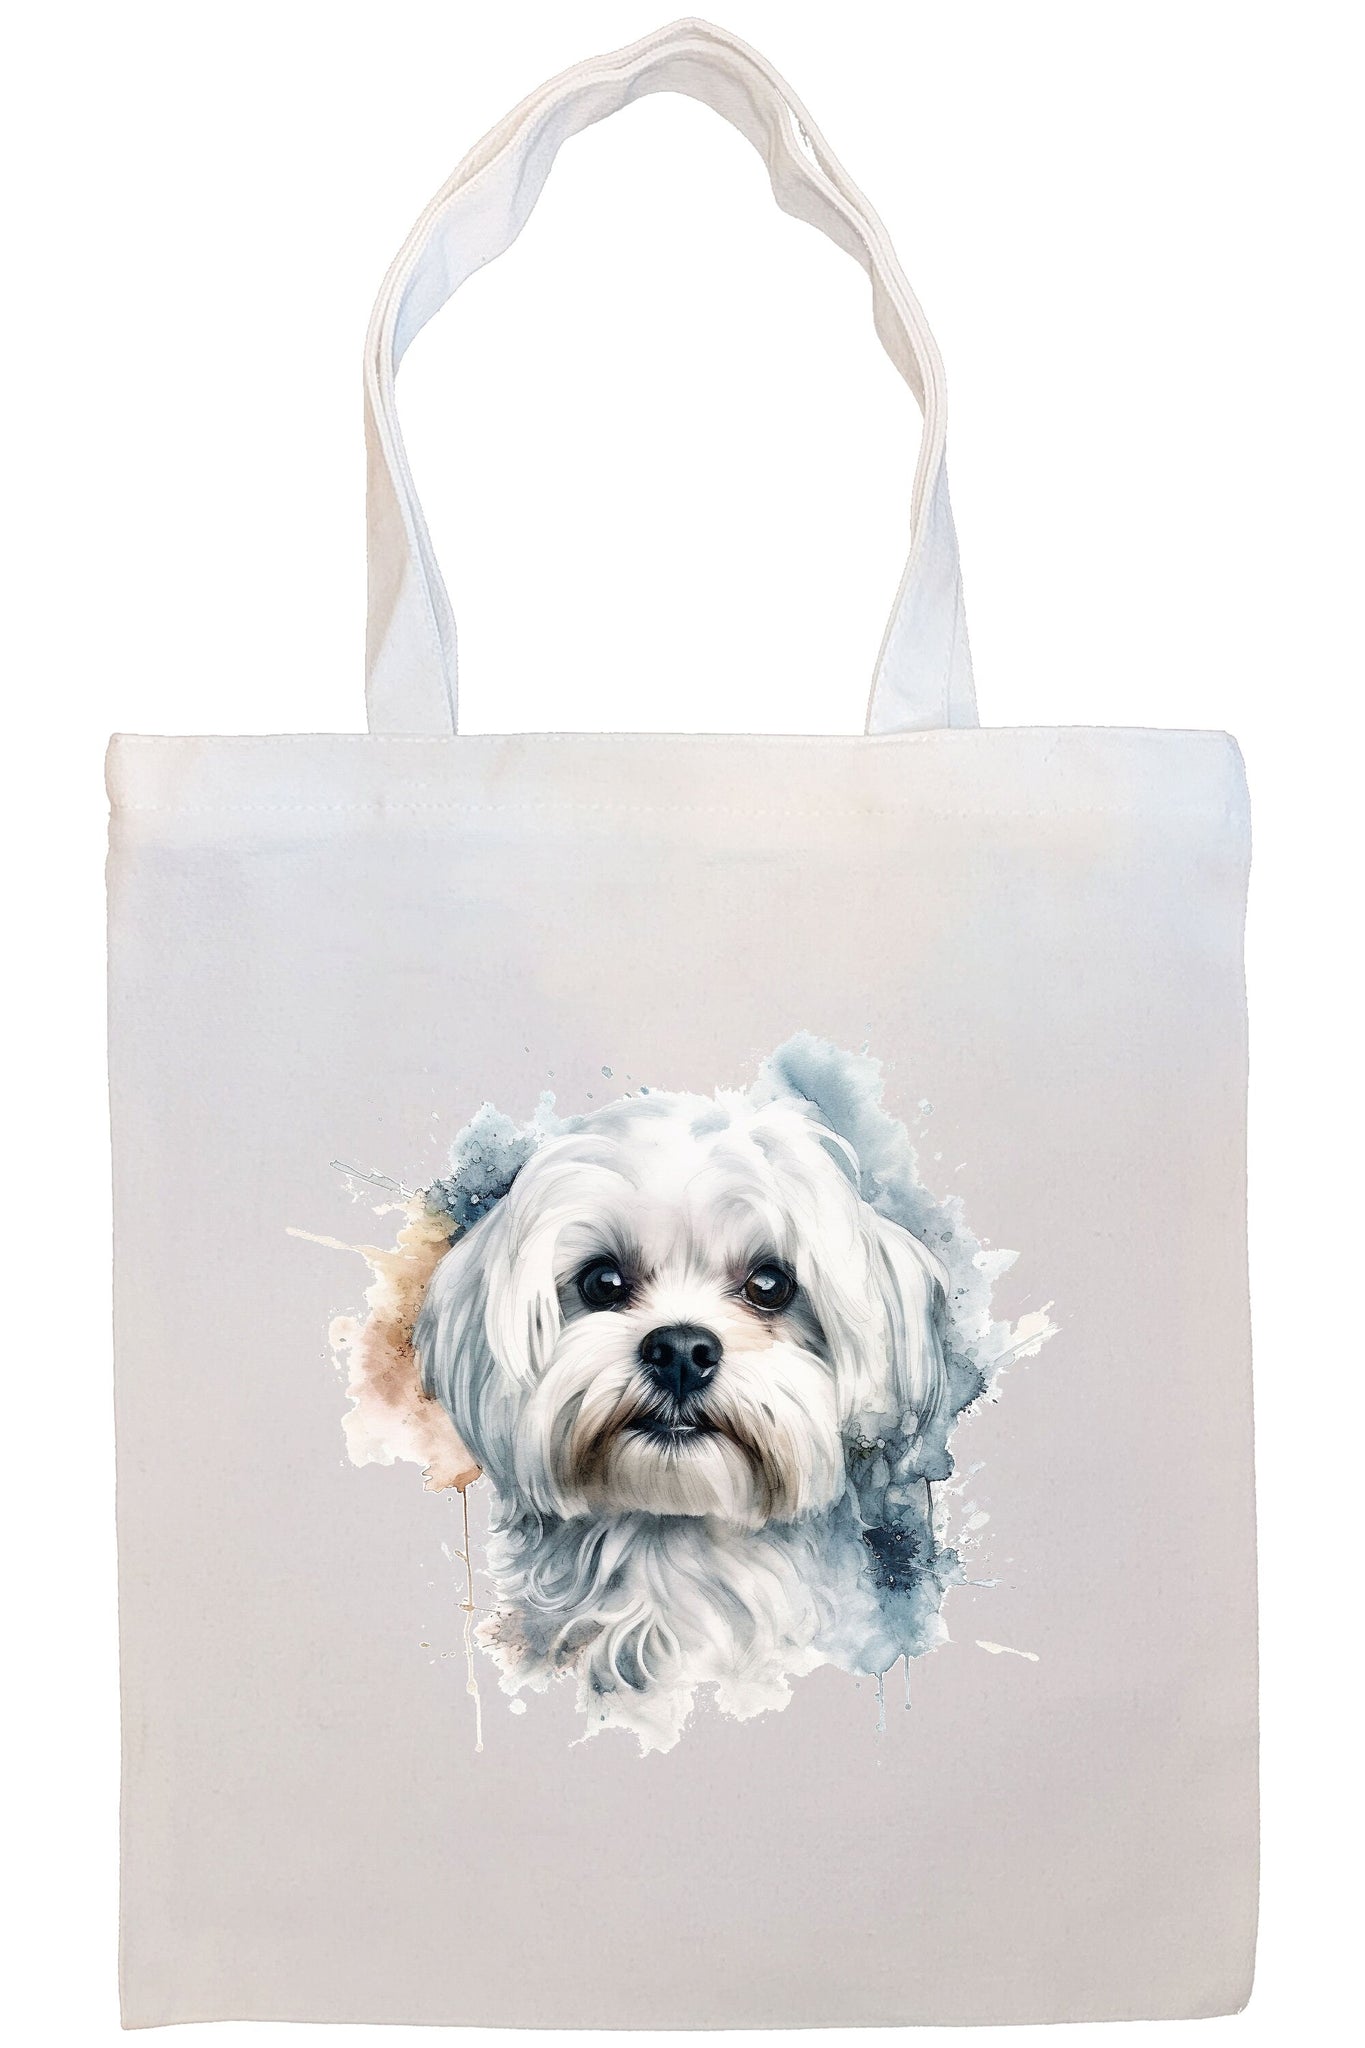 Canvas Tote Bag, Zippered With Handles & Inner Pocket, "Maltese"